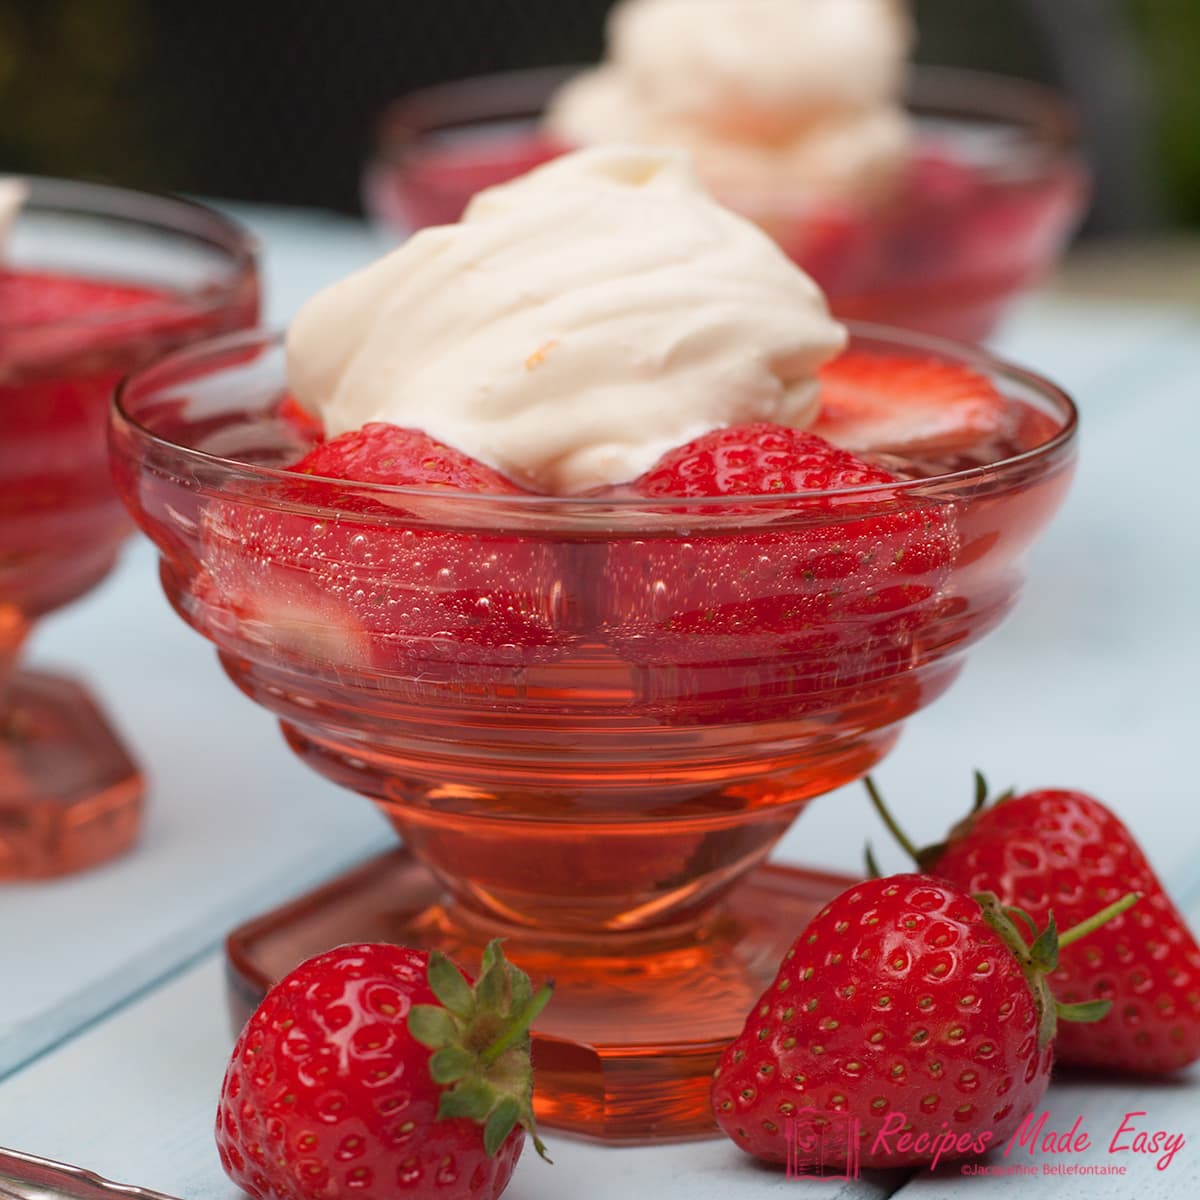 strawberry jelly in glass dish topped with Chantilly cream.